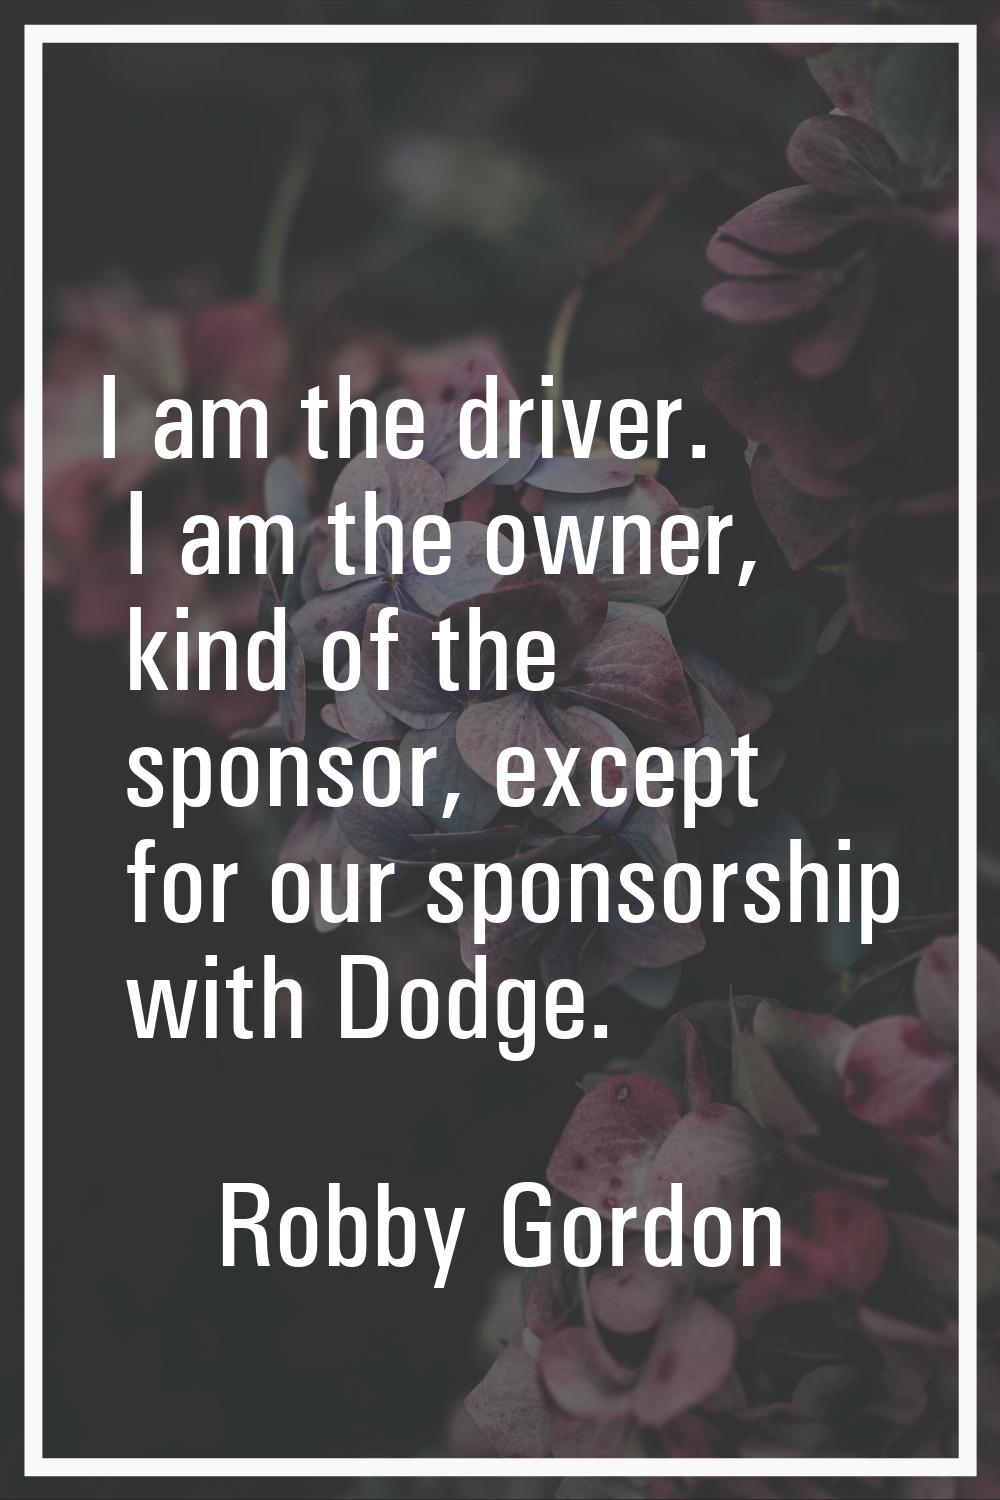 I am the driver. I am the owner, kind of the sponsor, except for our sponsorship with Dodge.